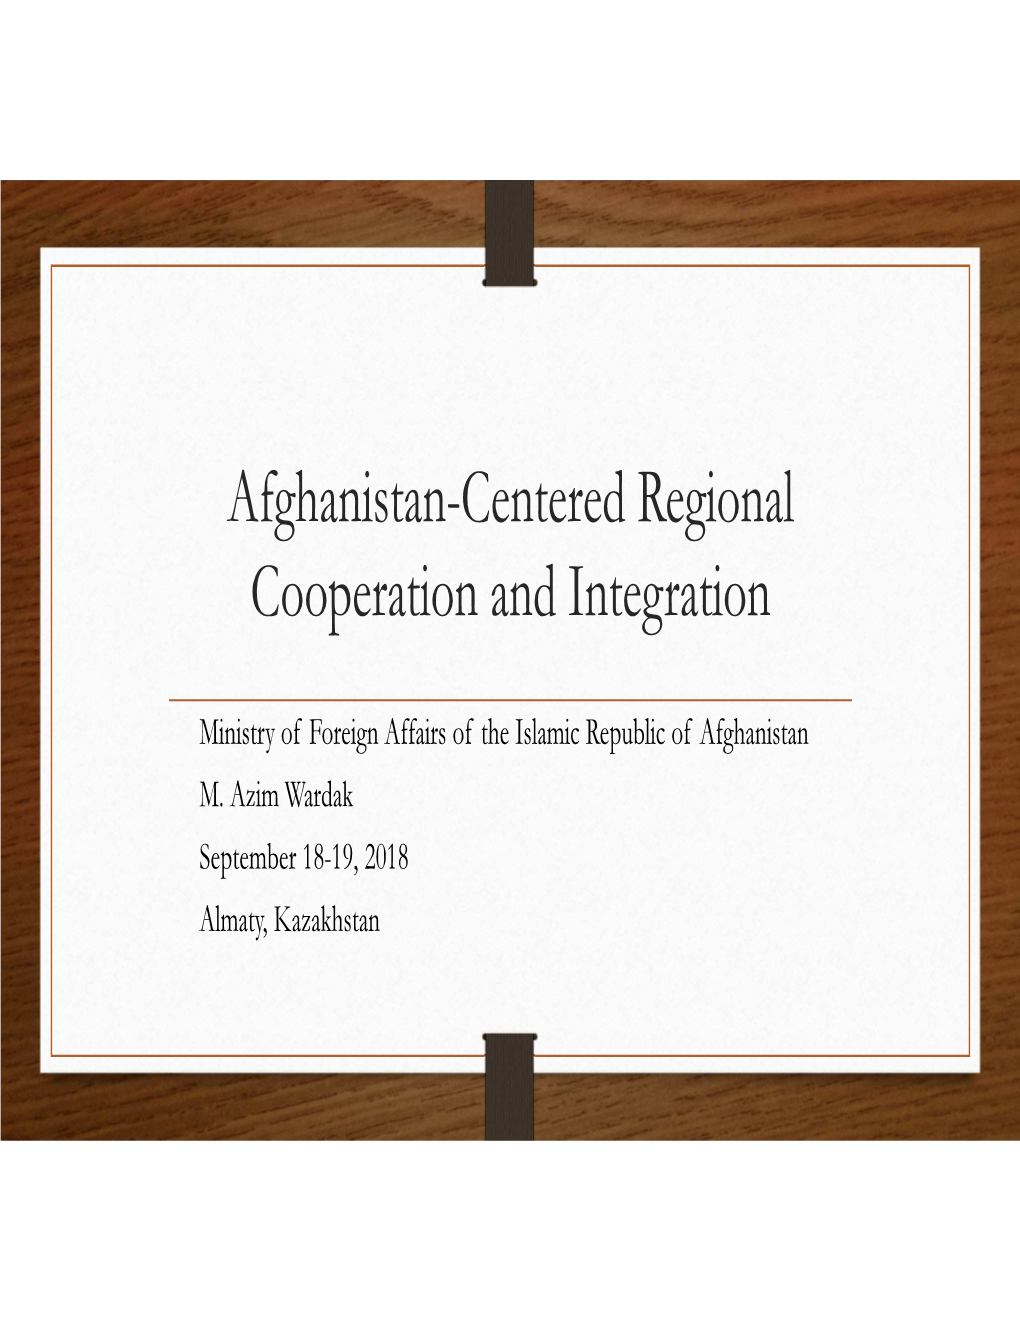 Afghanistan-Centered Regional Cooperation and Integration